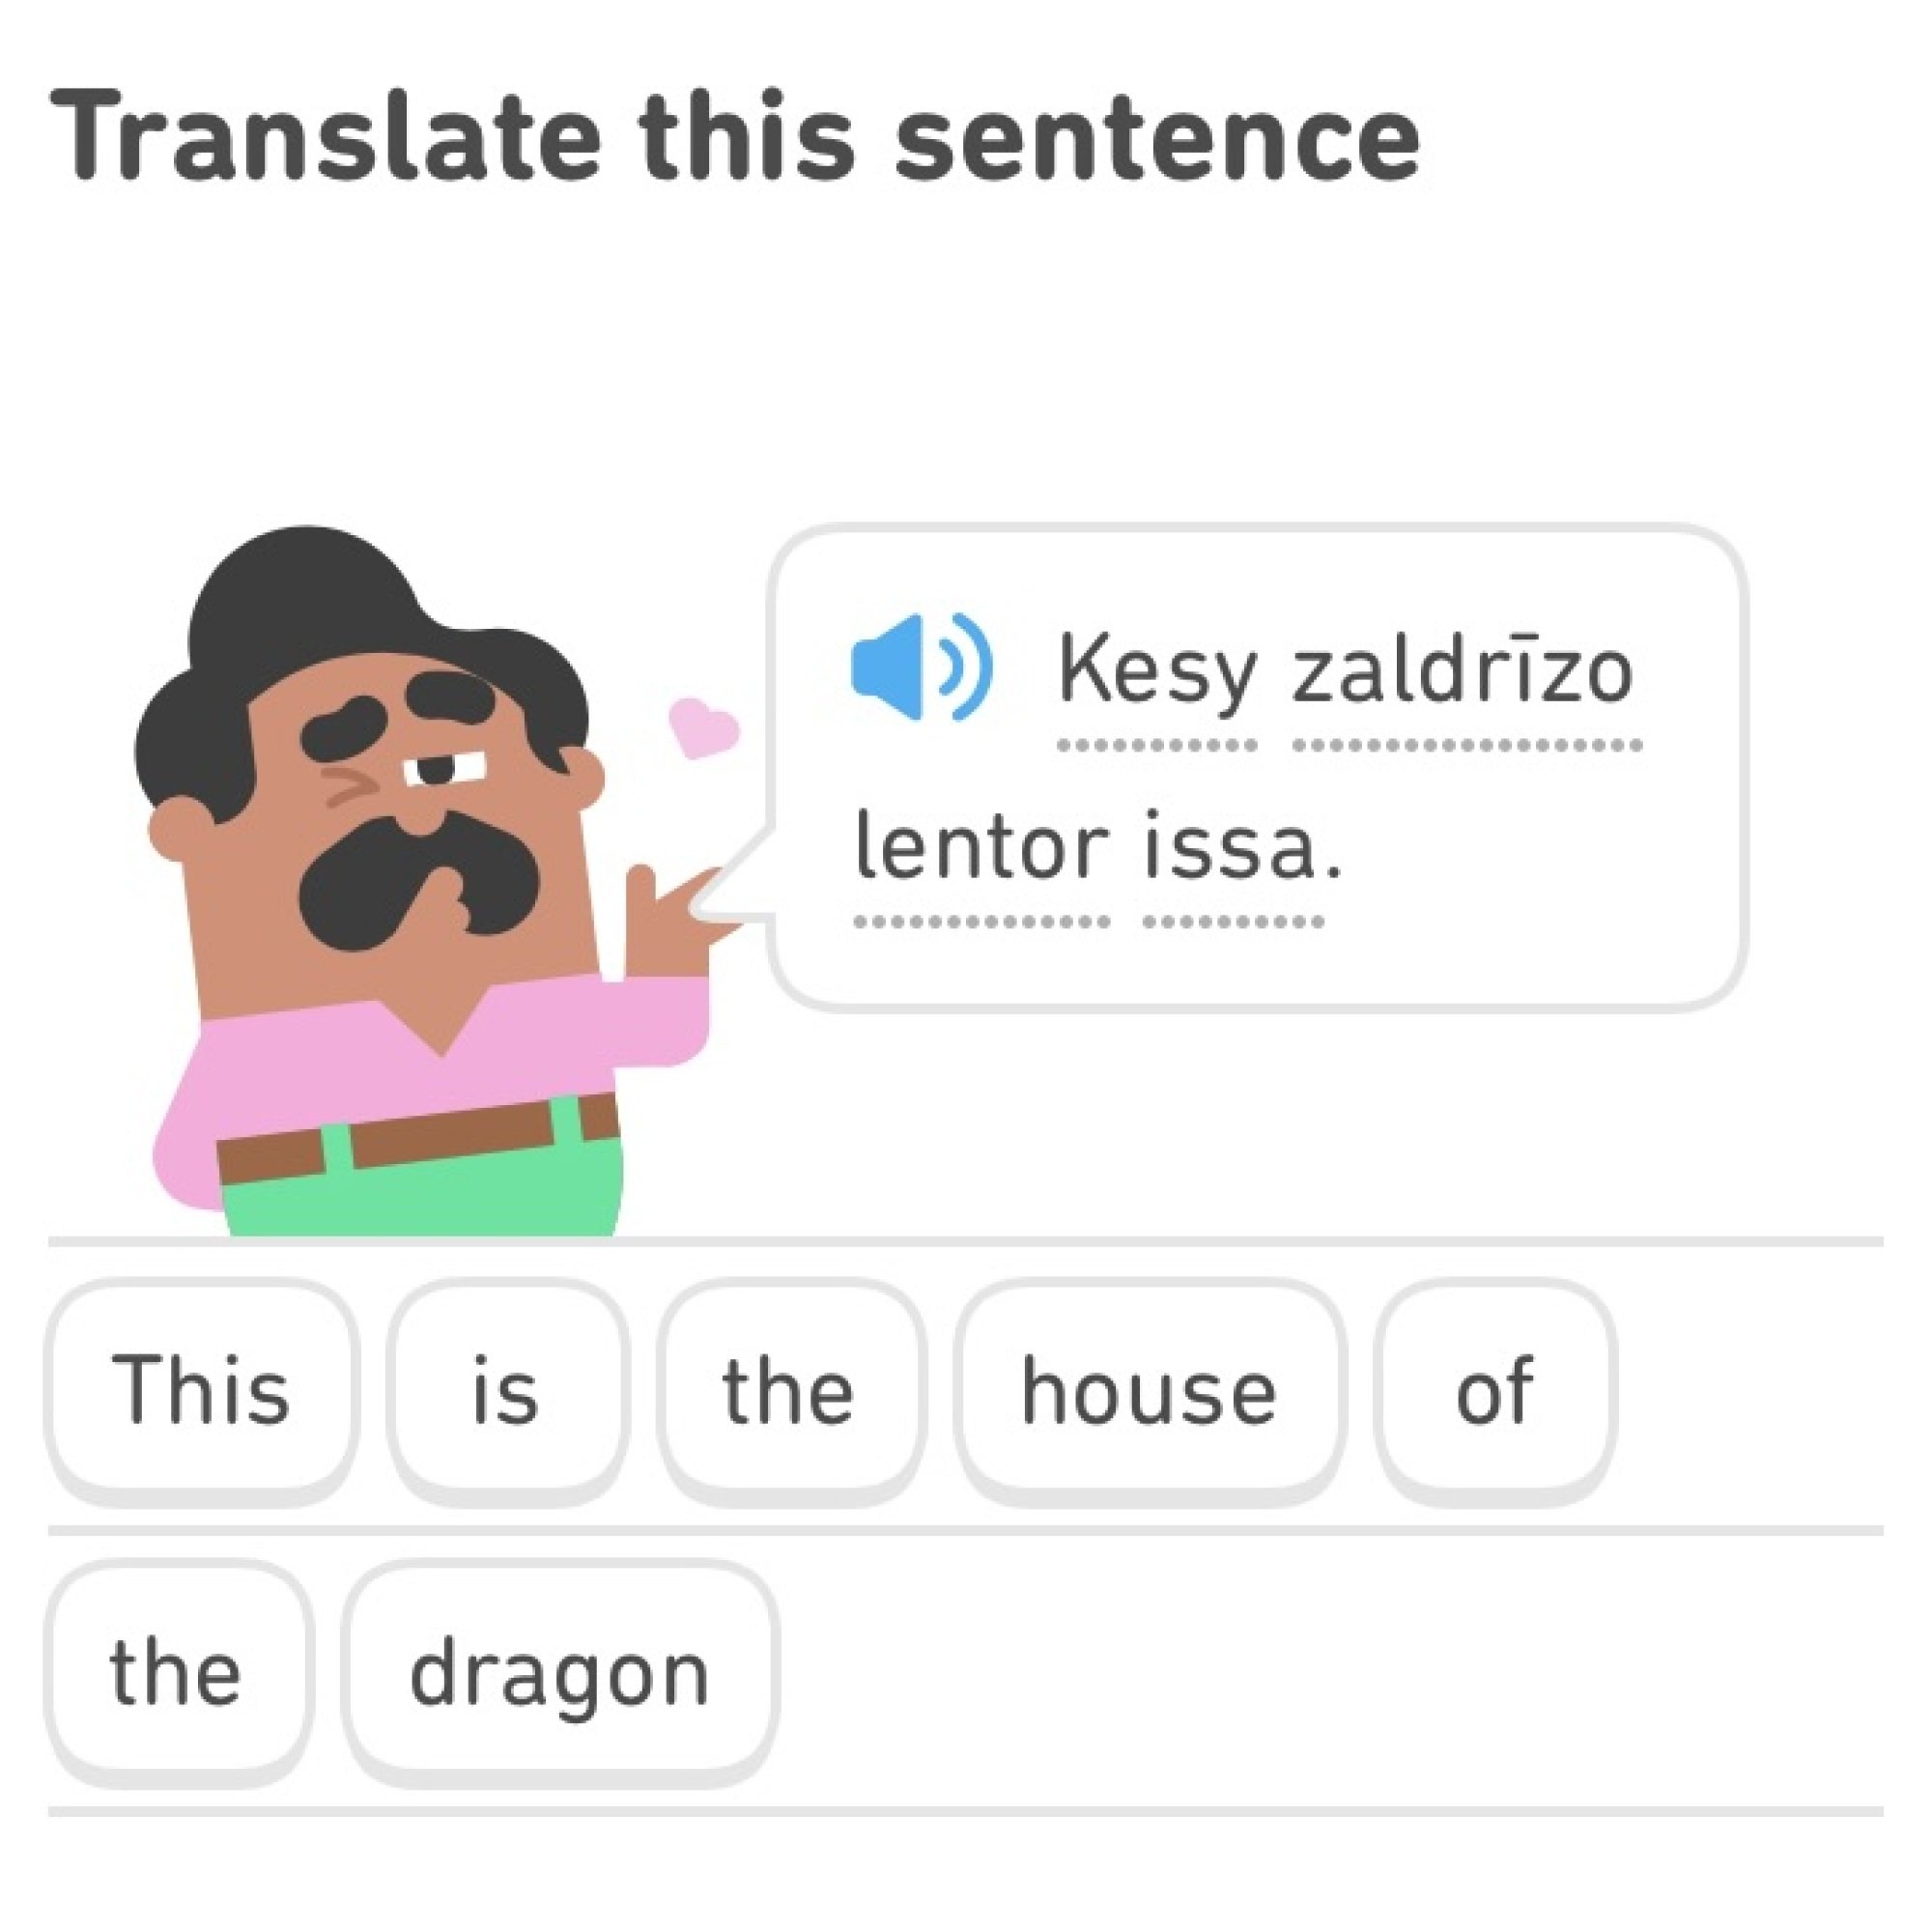 A Duolingo exercise translating the phrase "This is the house of the dragon" from High Valyrian.